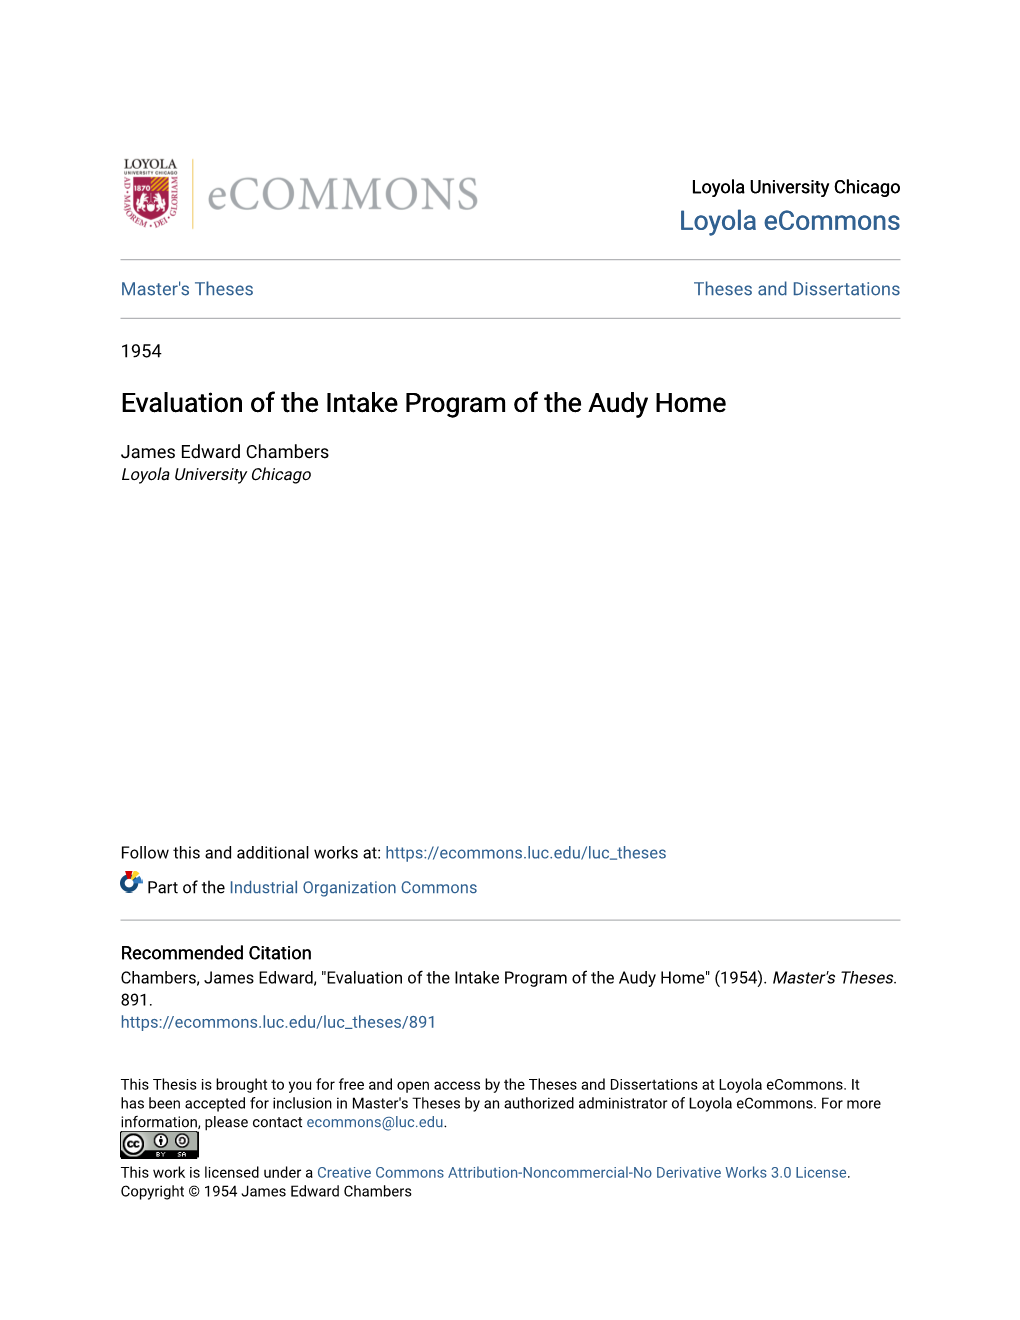 Evaluation of the Intake Program of the Audy Home